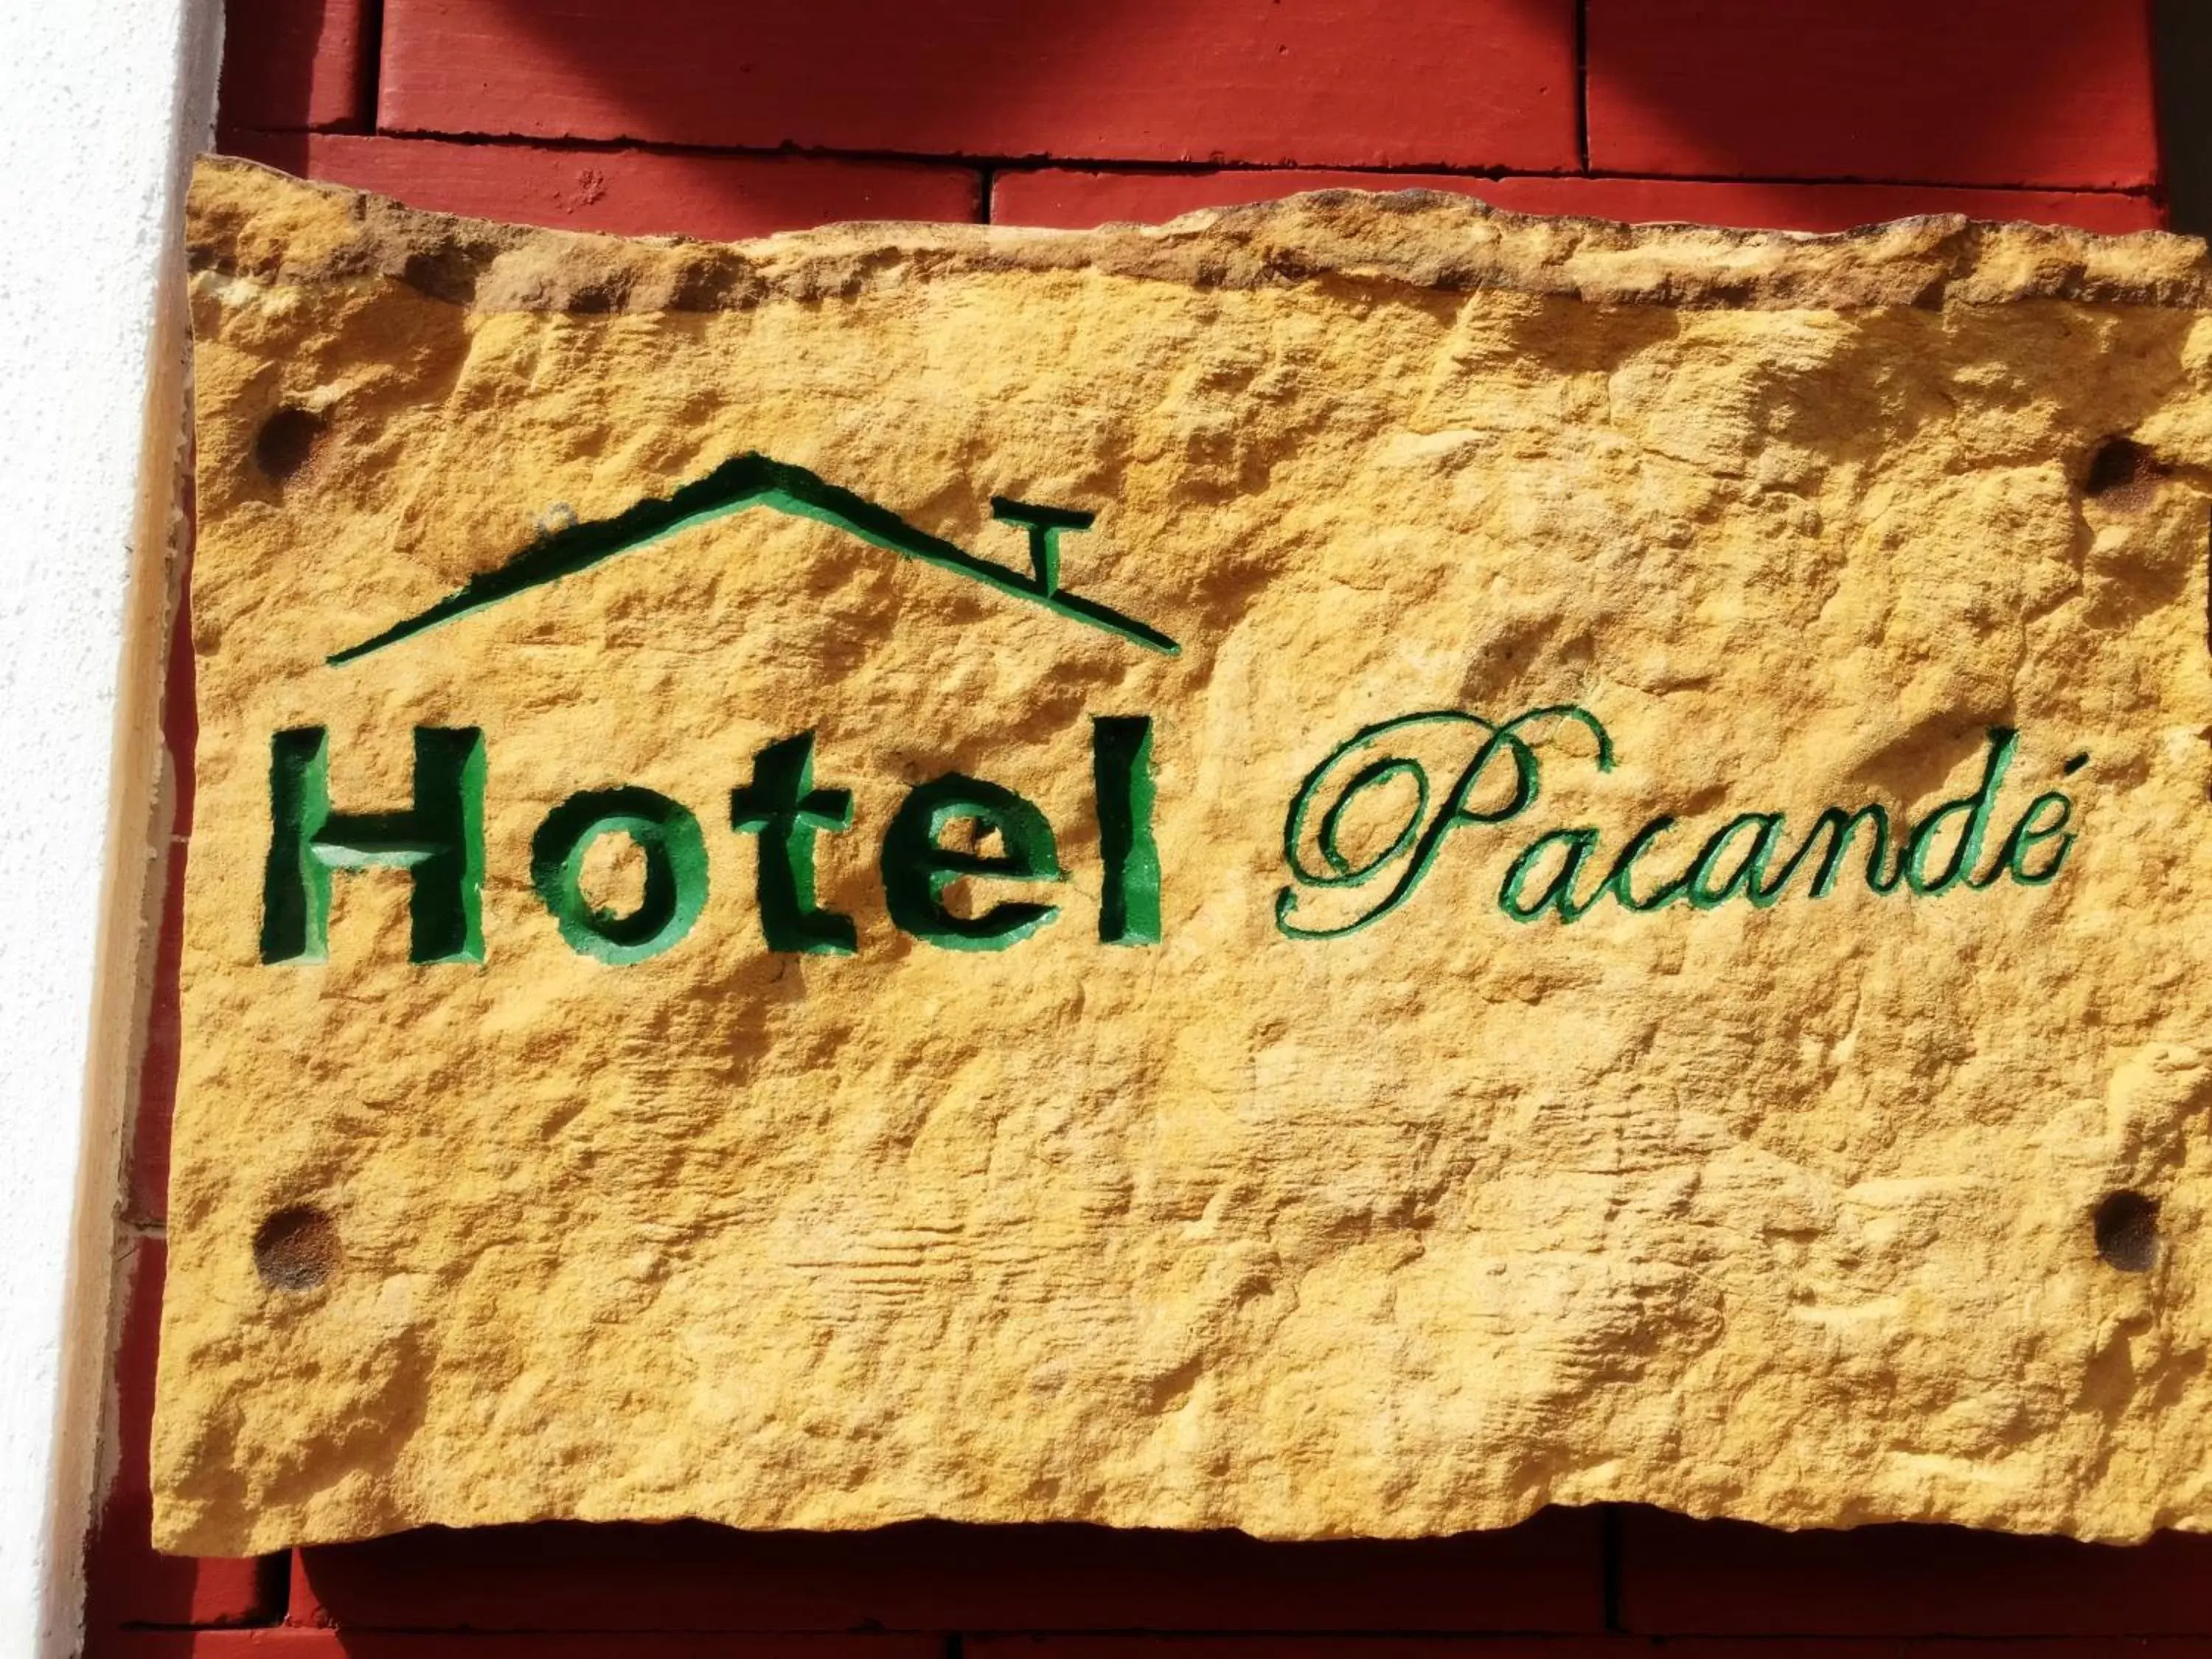 Property logo or sign, Property Logo/Sign in Hotel Pacande B&B